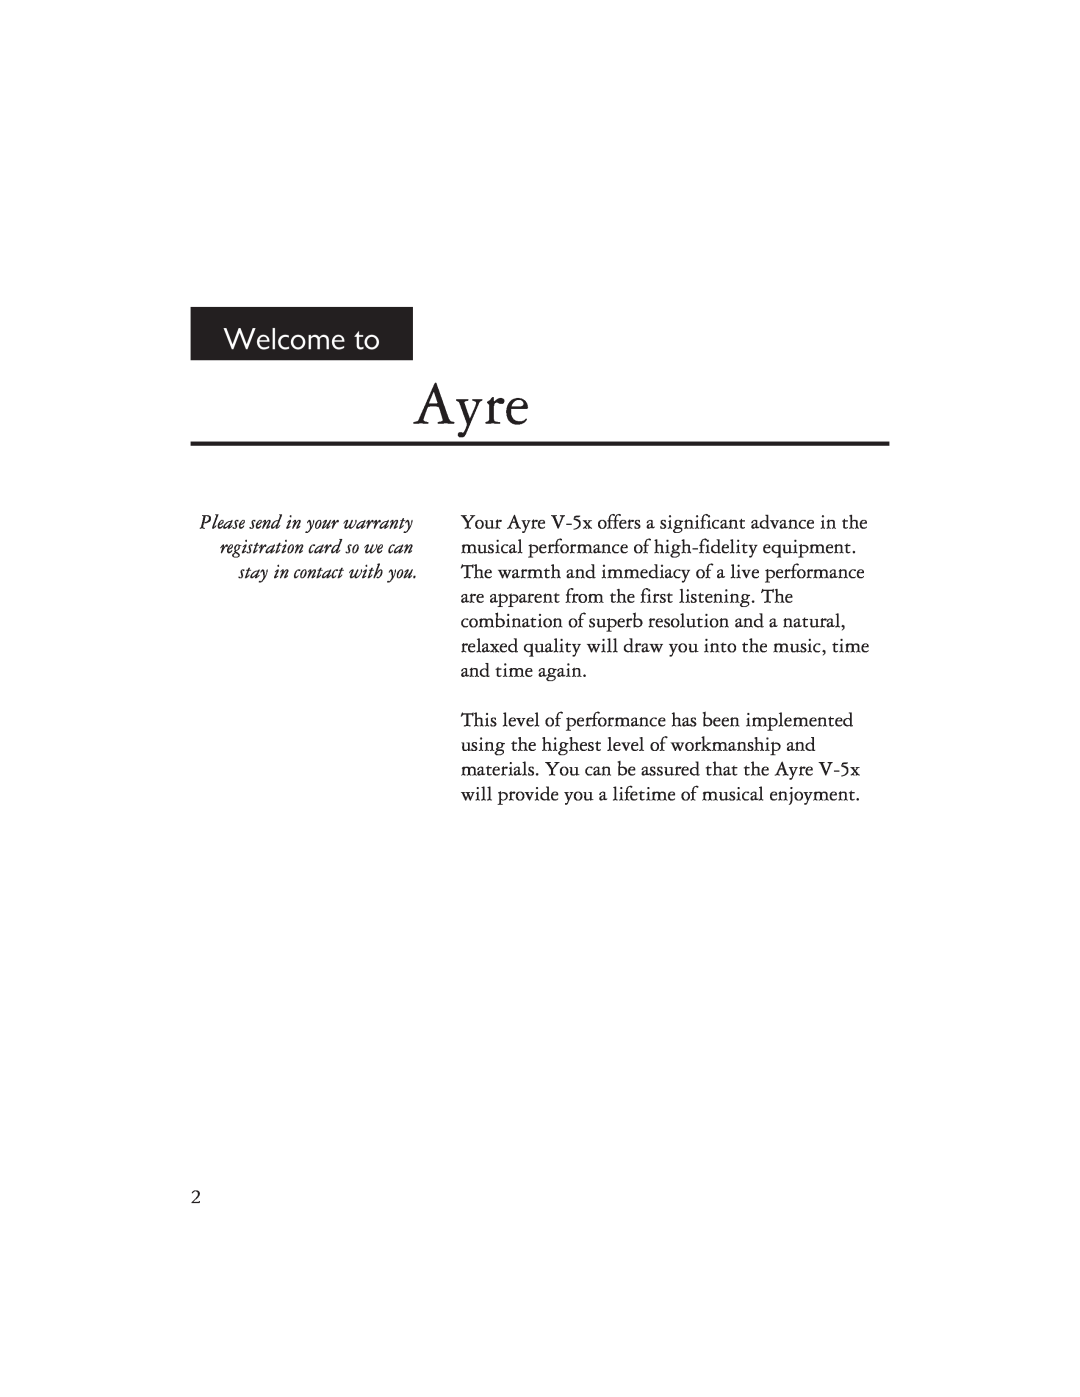 Ayre Acoustics V-5x owner manual Ayre, Welcome to 